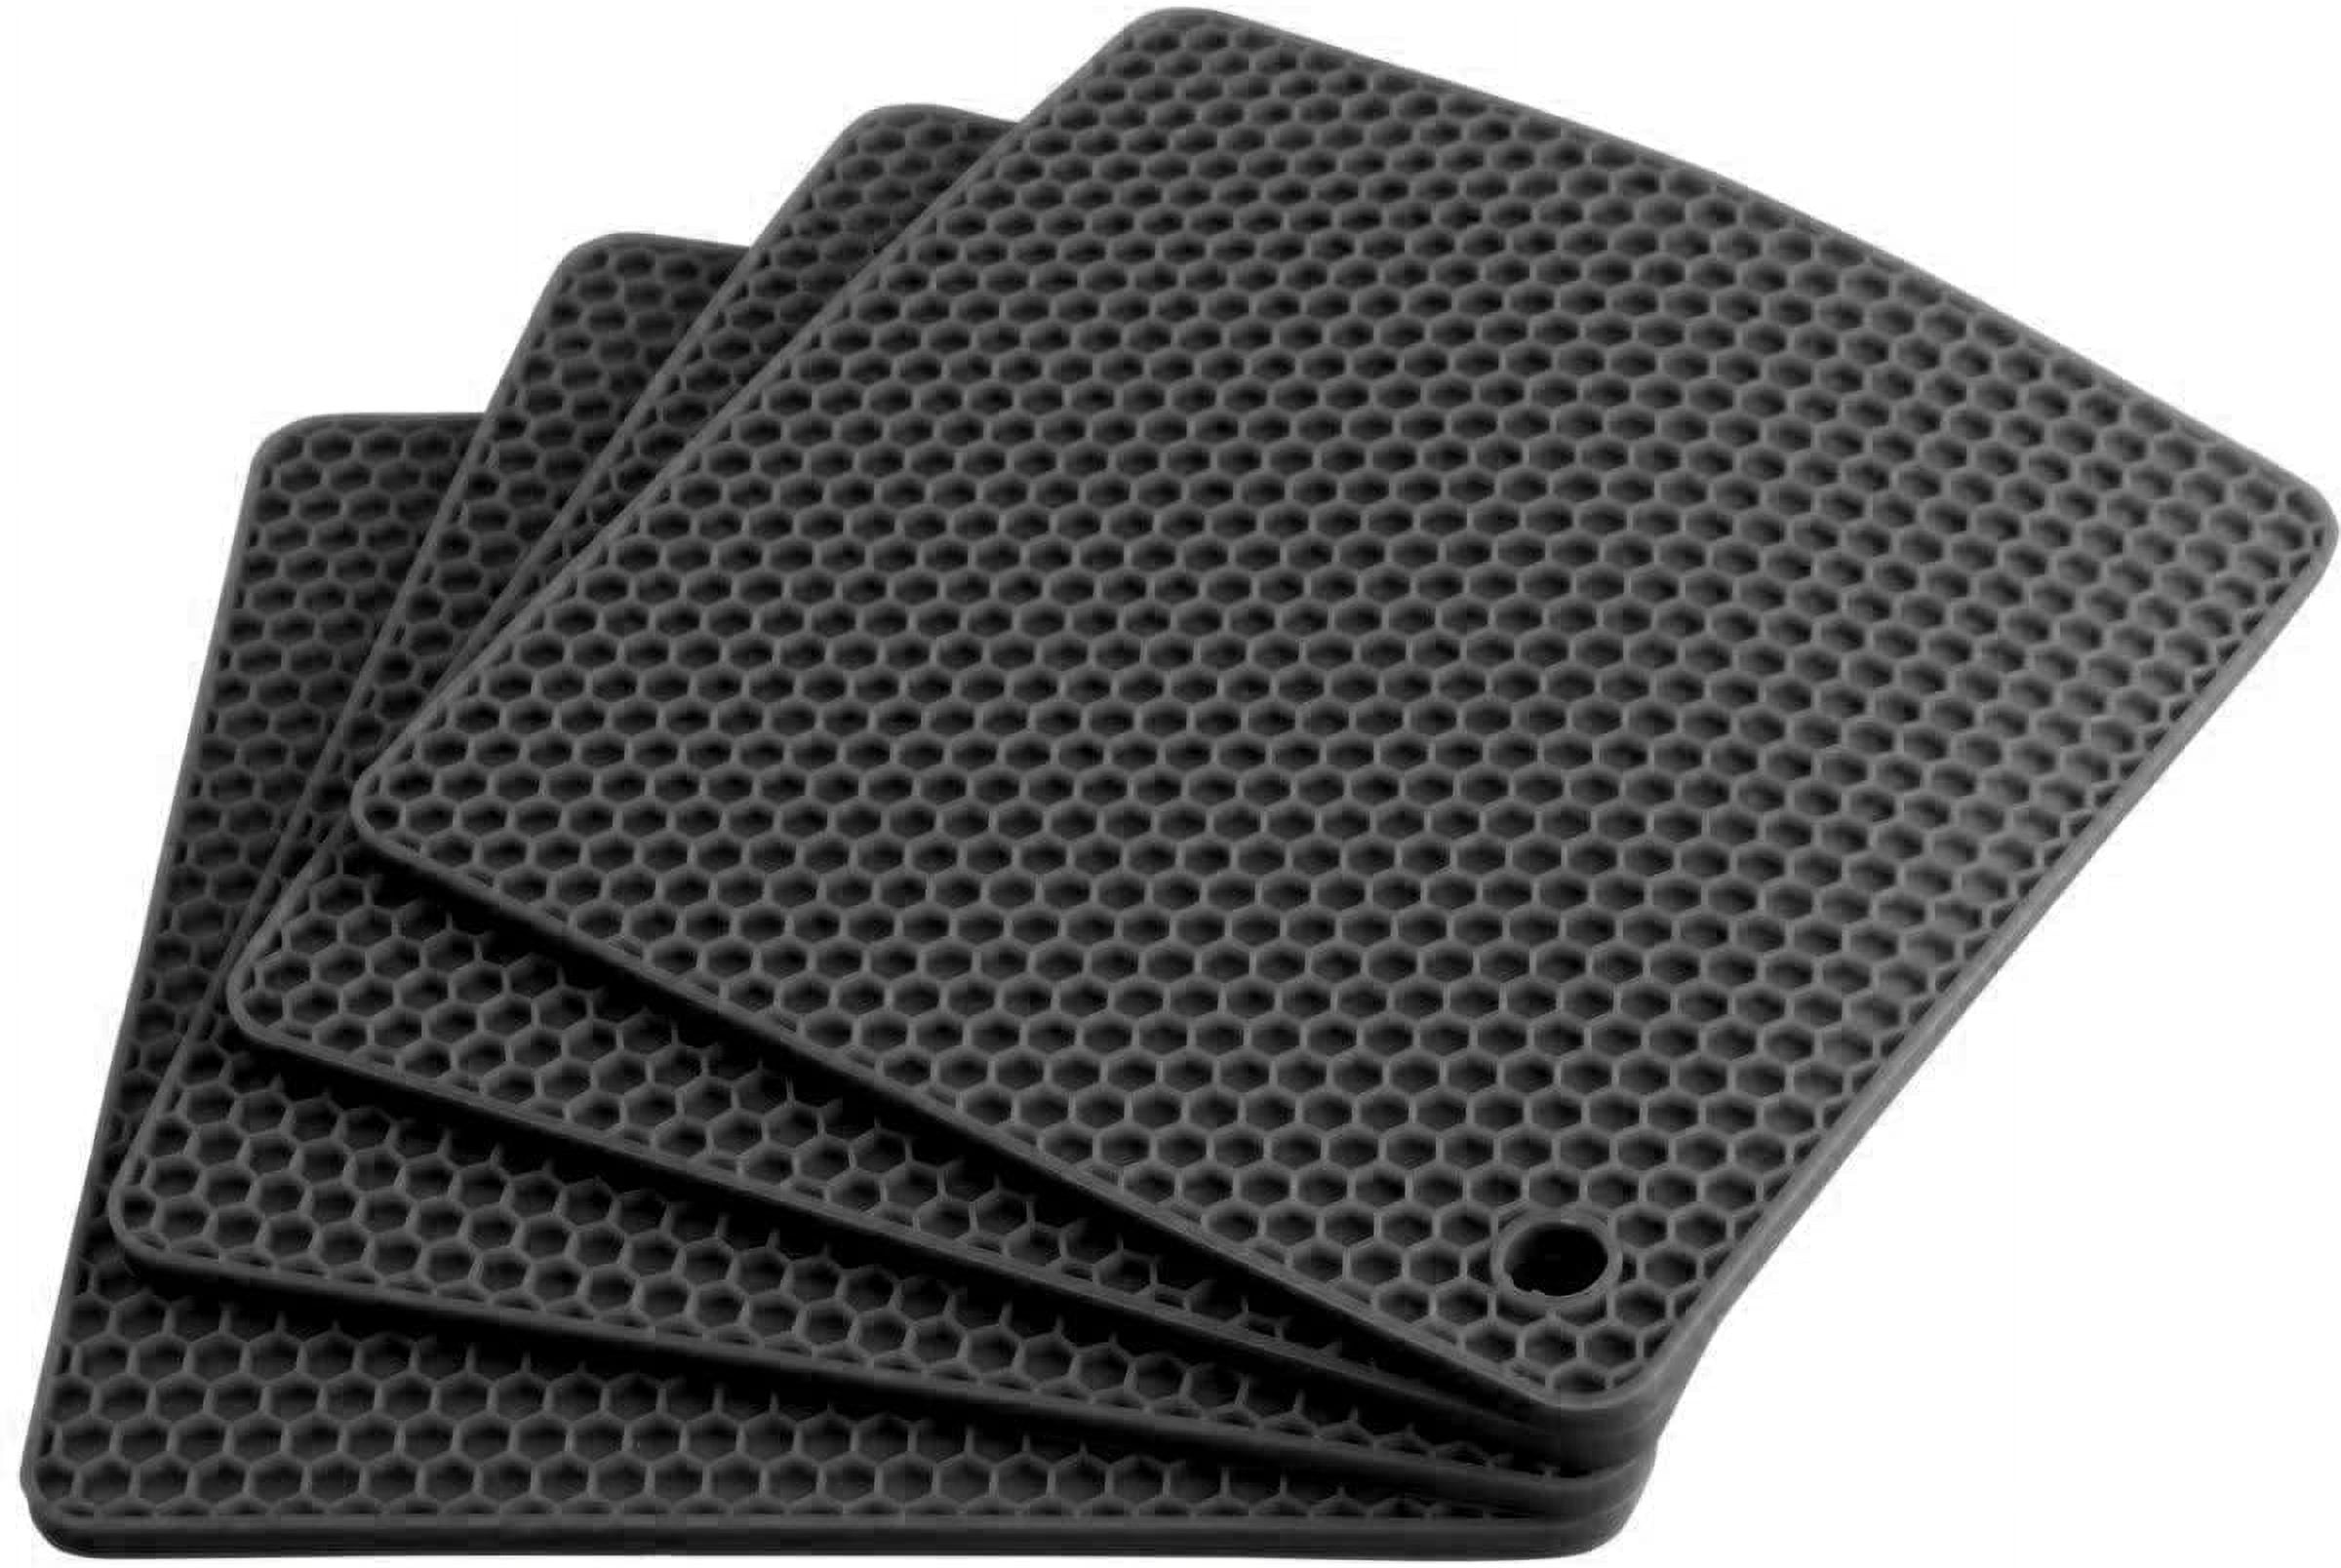 4 Pack Silicone Trivet Mats, Silicone Mat Heat Resistant Silicone Hot Pot Holders Hot Pads for Kitchen Countertop, Non-Slip Brown Silicone Trivets